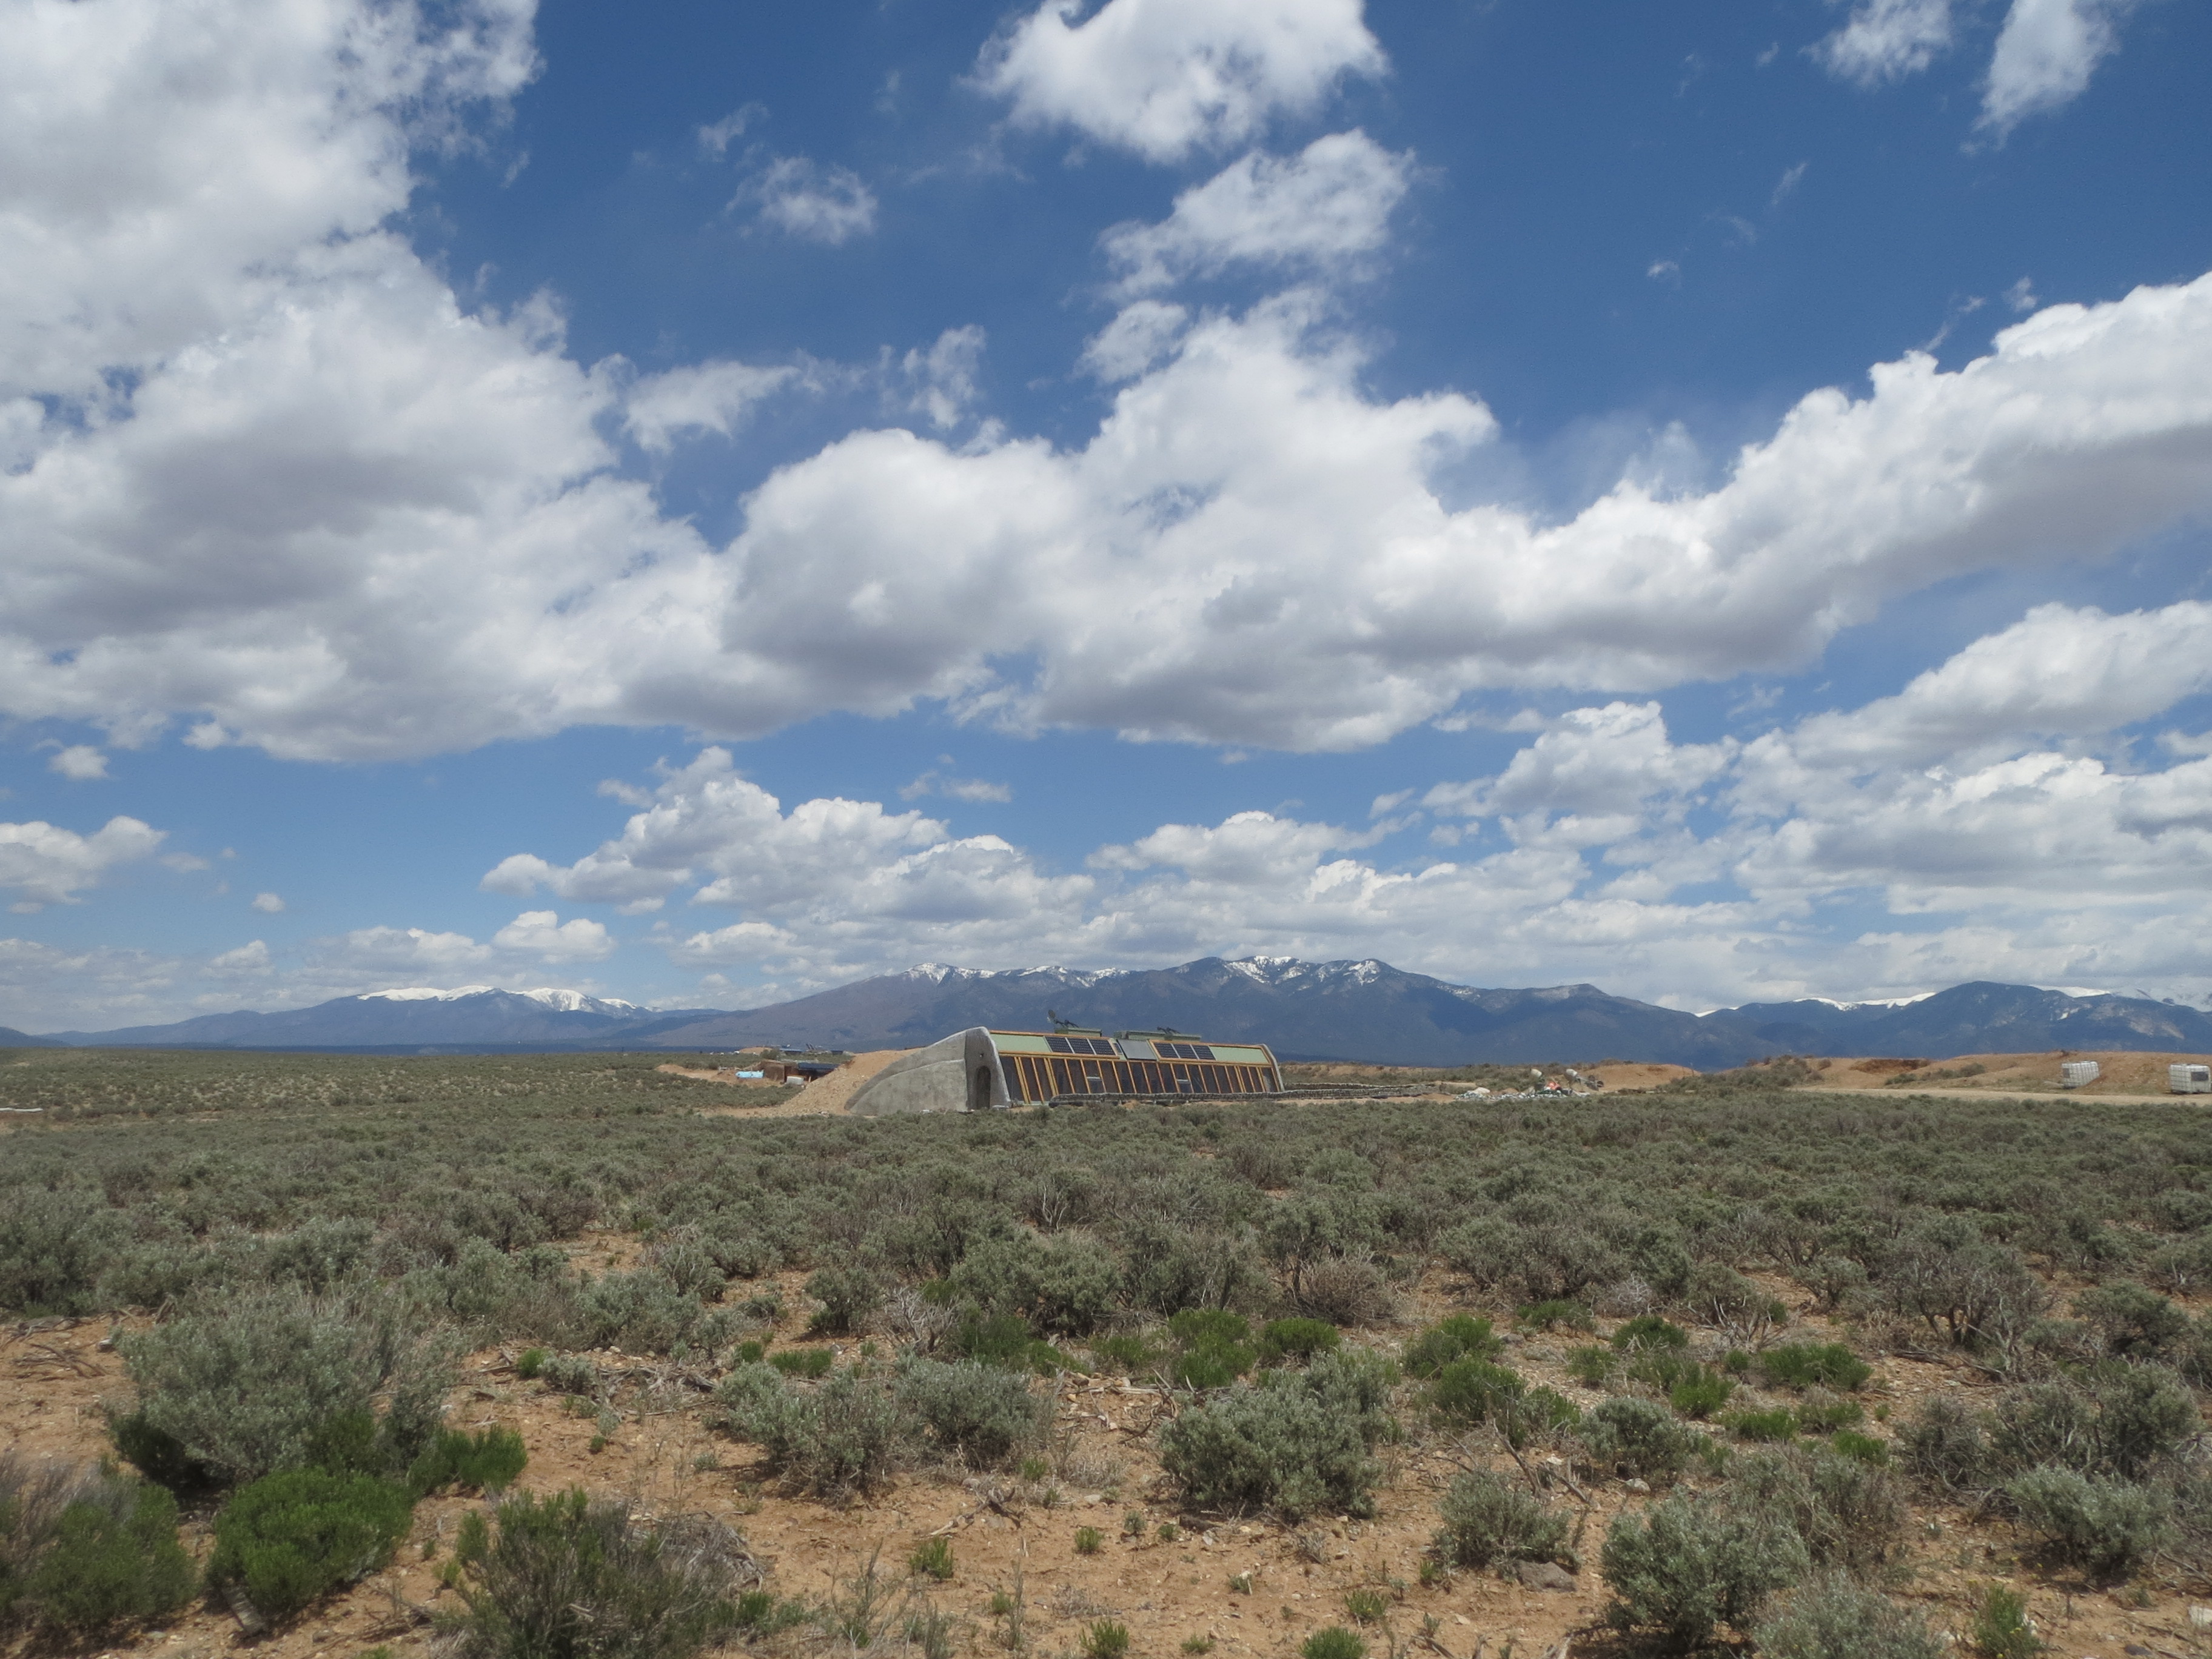 From the Field: Earthship Community, NM